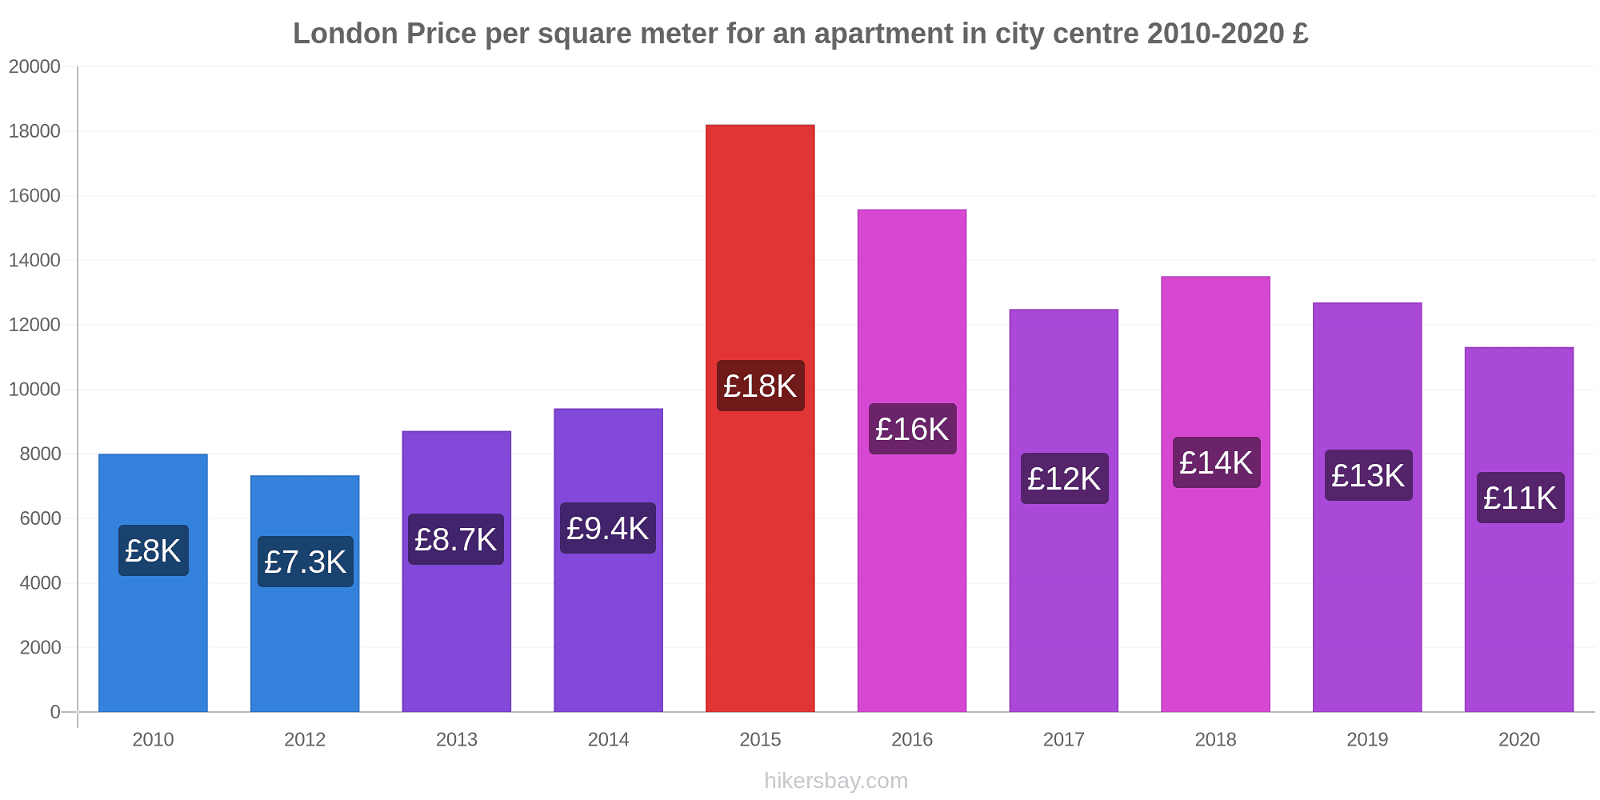 London price changes Price per square meter for an apartment in city centre hikersbay.com